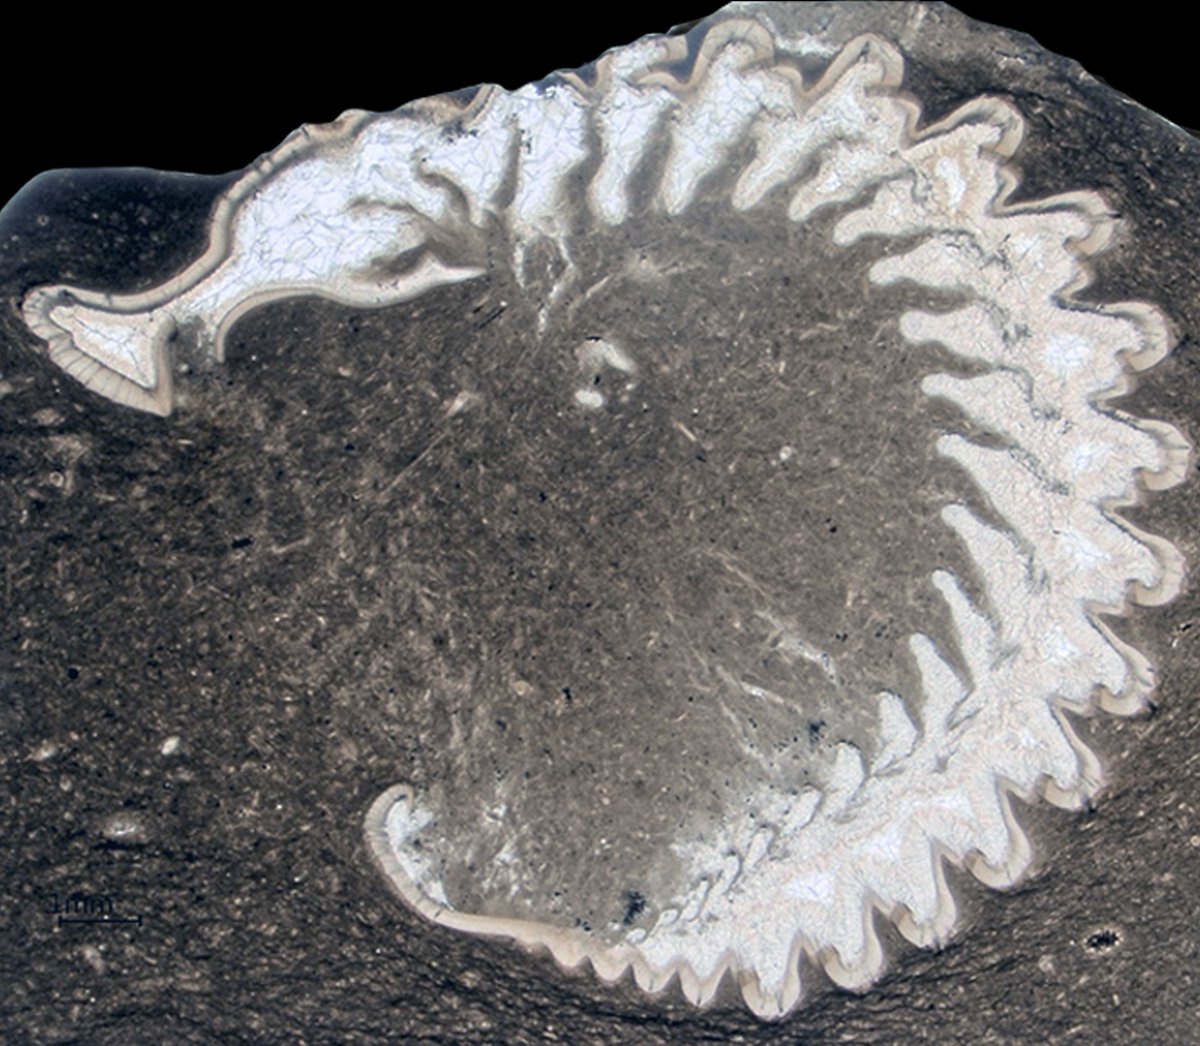 Excellent🧵on the lab's latest study @royalsociety where @SarahLosso1 & pals reveal how trilobites, millipedes & isopods share the same basic ventral adaptations for protective enrolment based on @MCZHarvard historic collections - some serious trilobite eye candy right here! 🤩